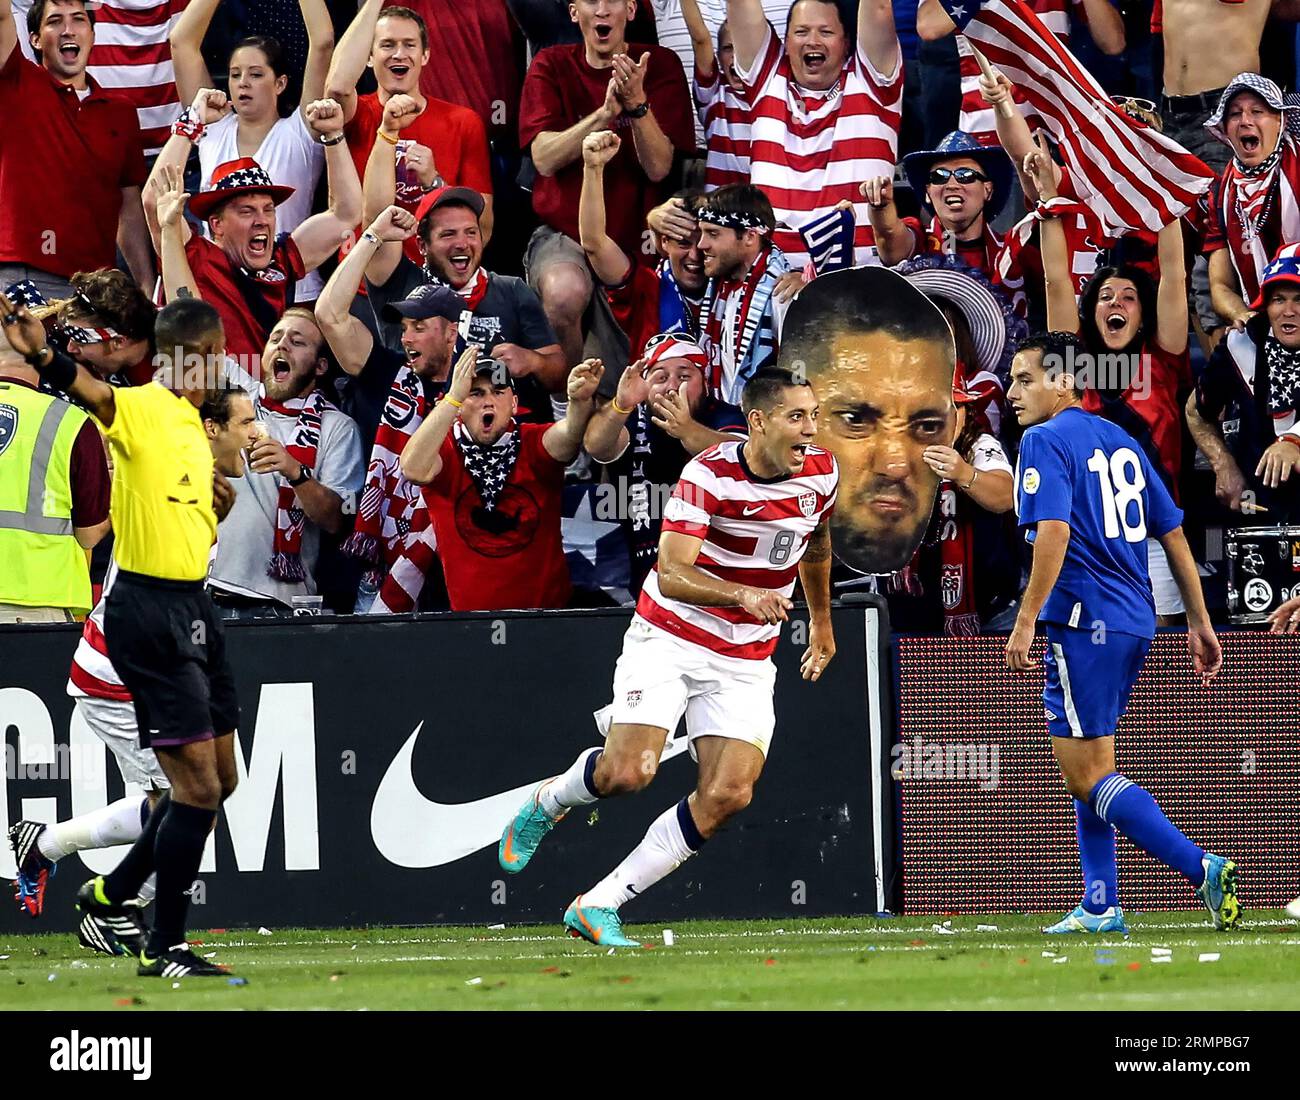 October16 2012:  Clint Dempsey (8)of the USA MNT and a cartoon likeness after he had scored and passes Carlos Figueroa (18) of  Guatemala during a CONCACAF semi-final World Cup qualifier at Livestrong Sporting Park, in Kansas City, KS. USA won 3-1. Stock Photo